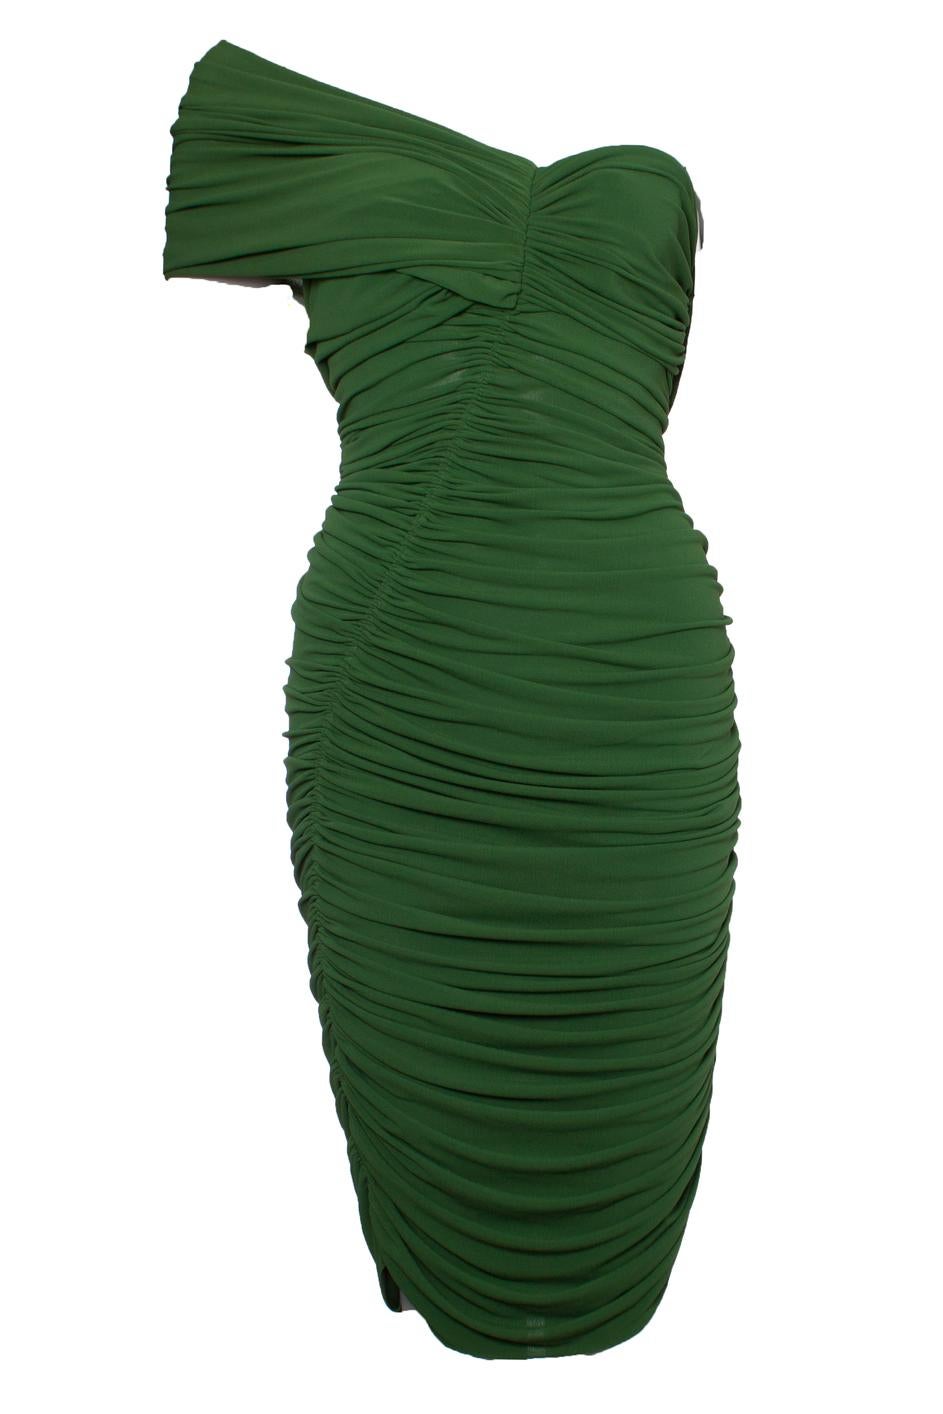 Lanvin, Green draped dress with one shoulder, could be worn multiple ways. The item is in very good condition. (As seen on the runway in 2012).

• CONDITION: very good condition 

• SIZE: IT40 - XS 

• MEASUREMENTS: length 95 cm, width 39 cm, waist